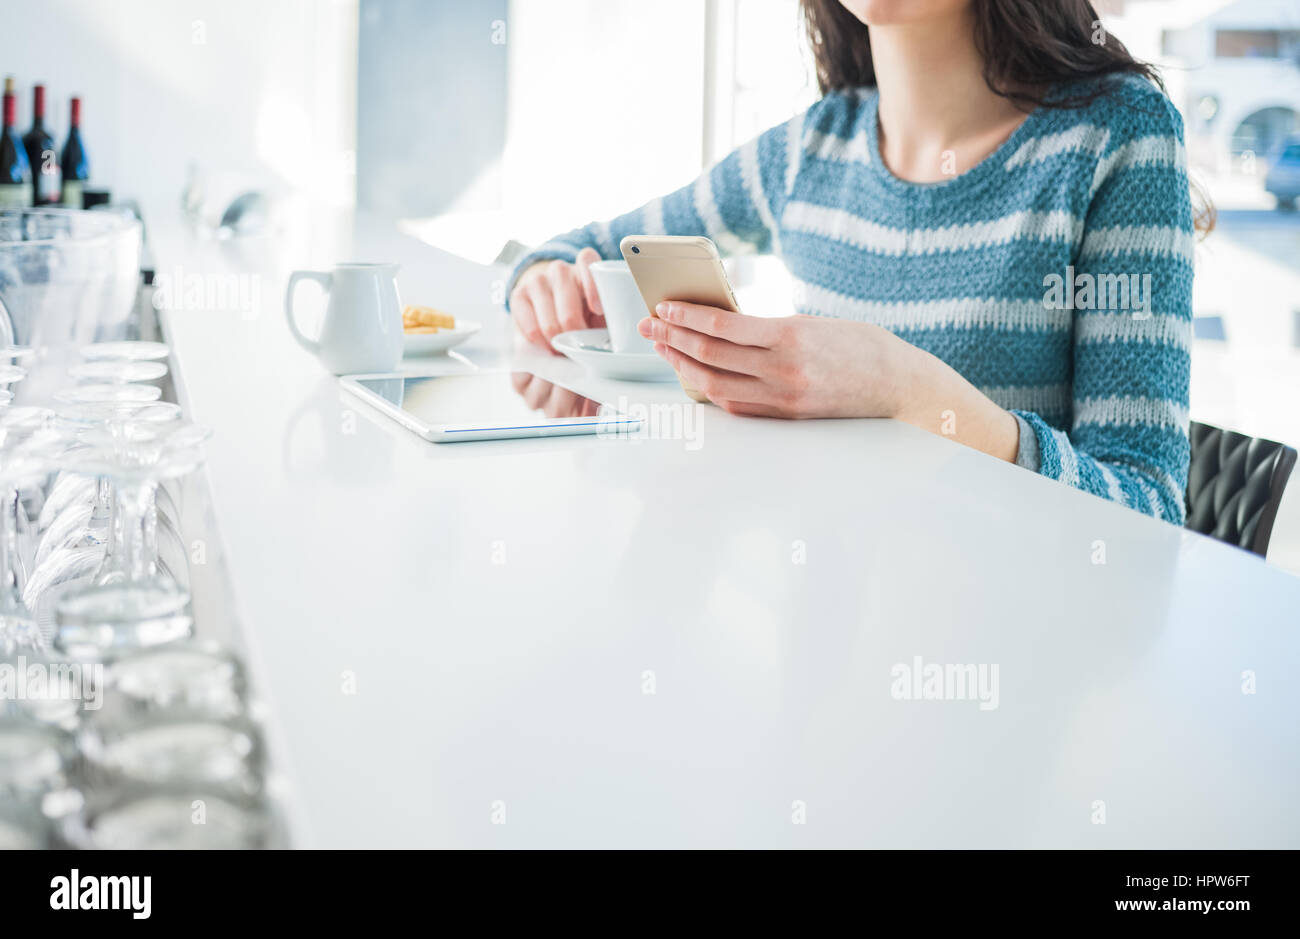 Woman at the bar sitting at the counter and using a mobile phone, hands detail Stock Photo